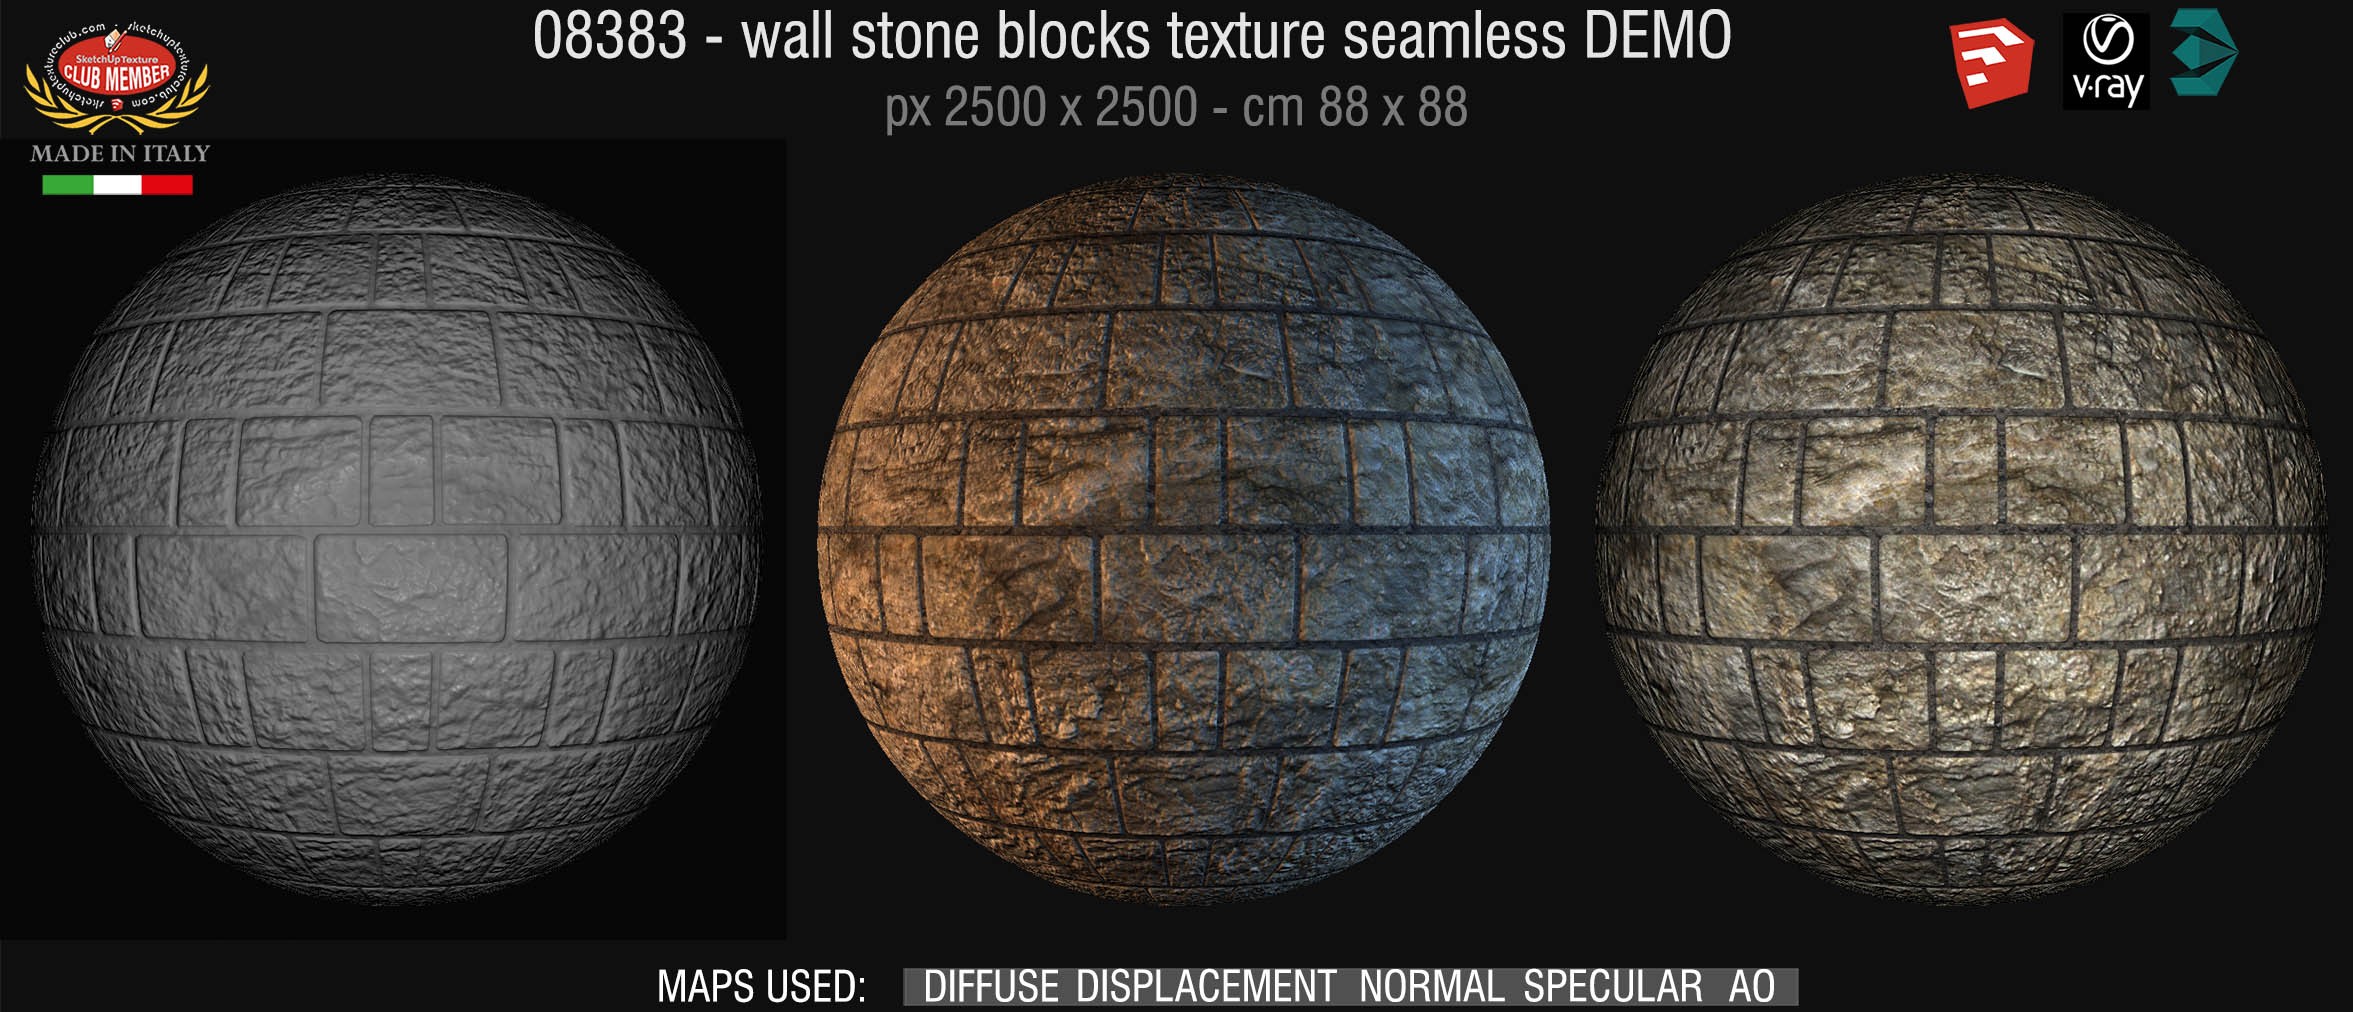 08383 HR Wall stone with regular blocks texture + maps DEMO